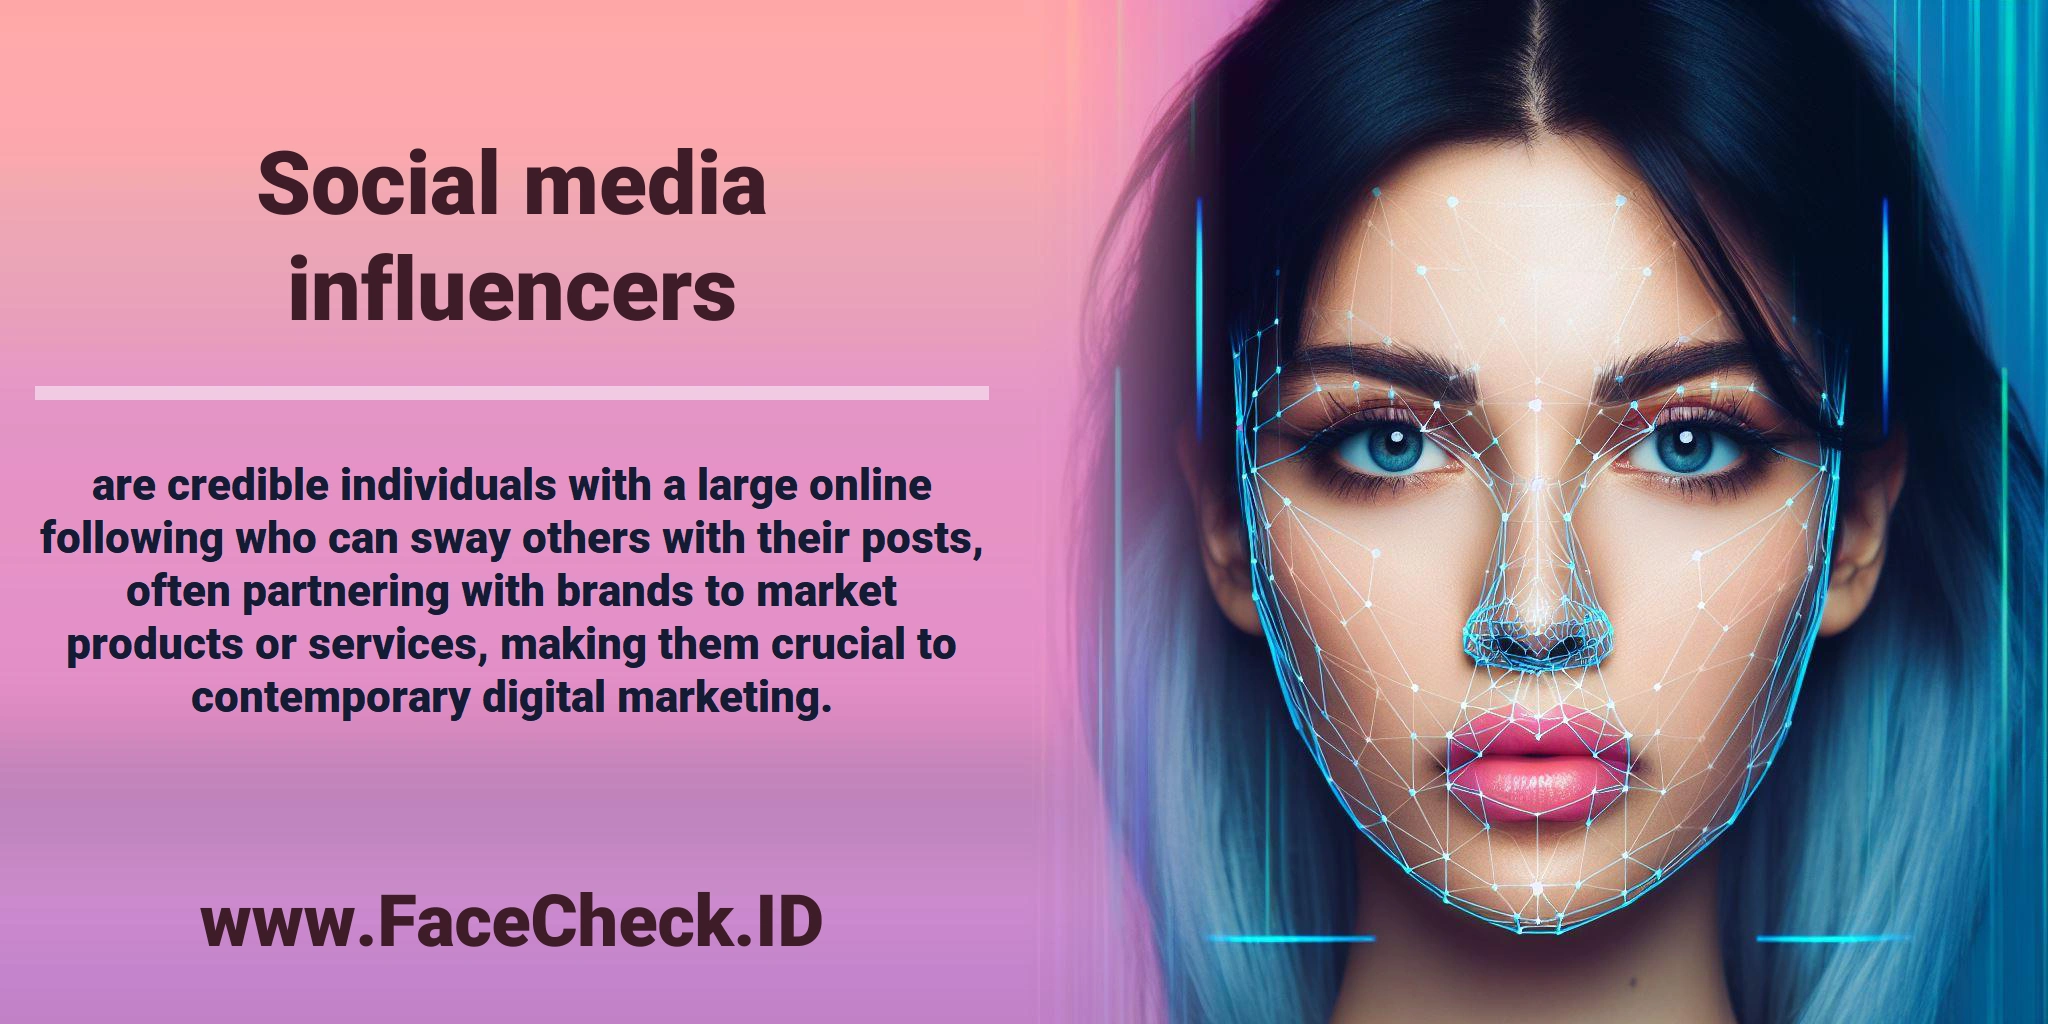 <b>Social media influencers</b> are credible individuals with a large online following who can sway others with their posts, often partnering with brands to market products or services, making them crucial to contemporary digital marketing.